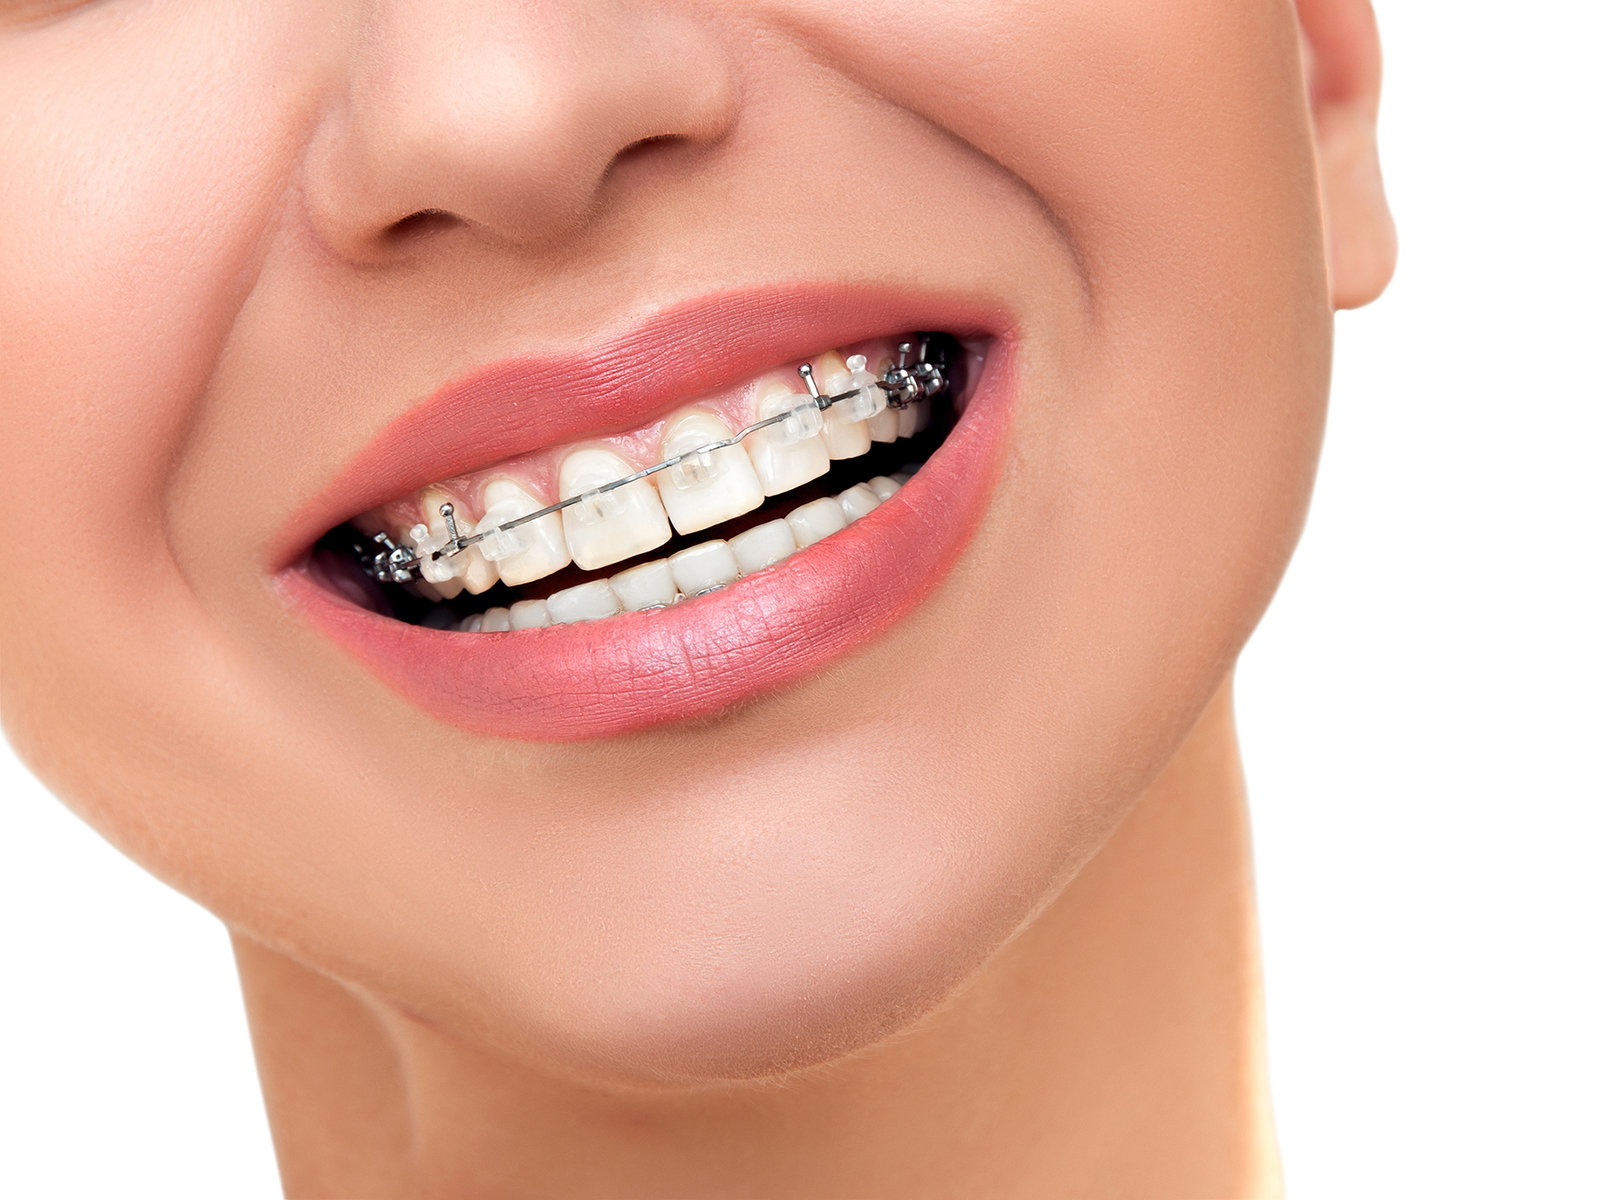 Are colored braces more expensive?